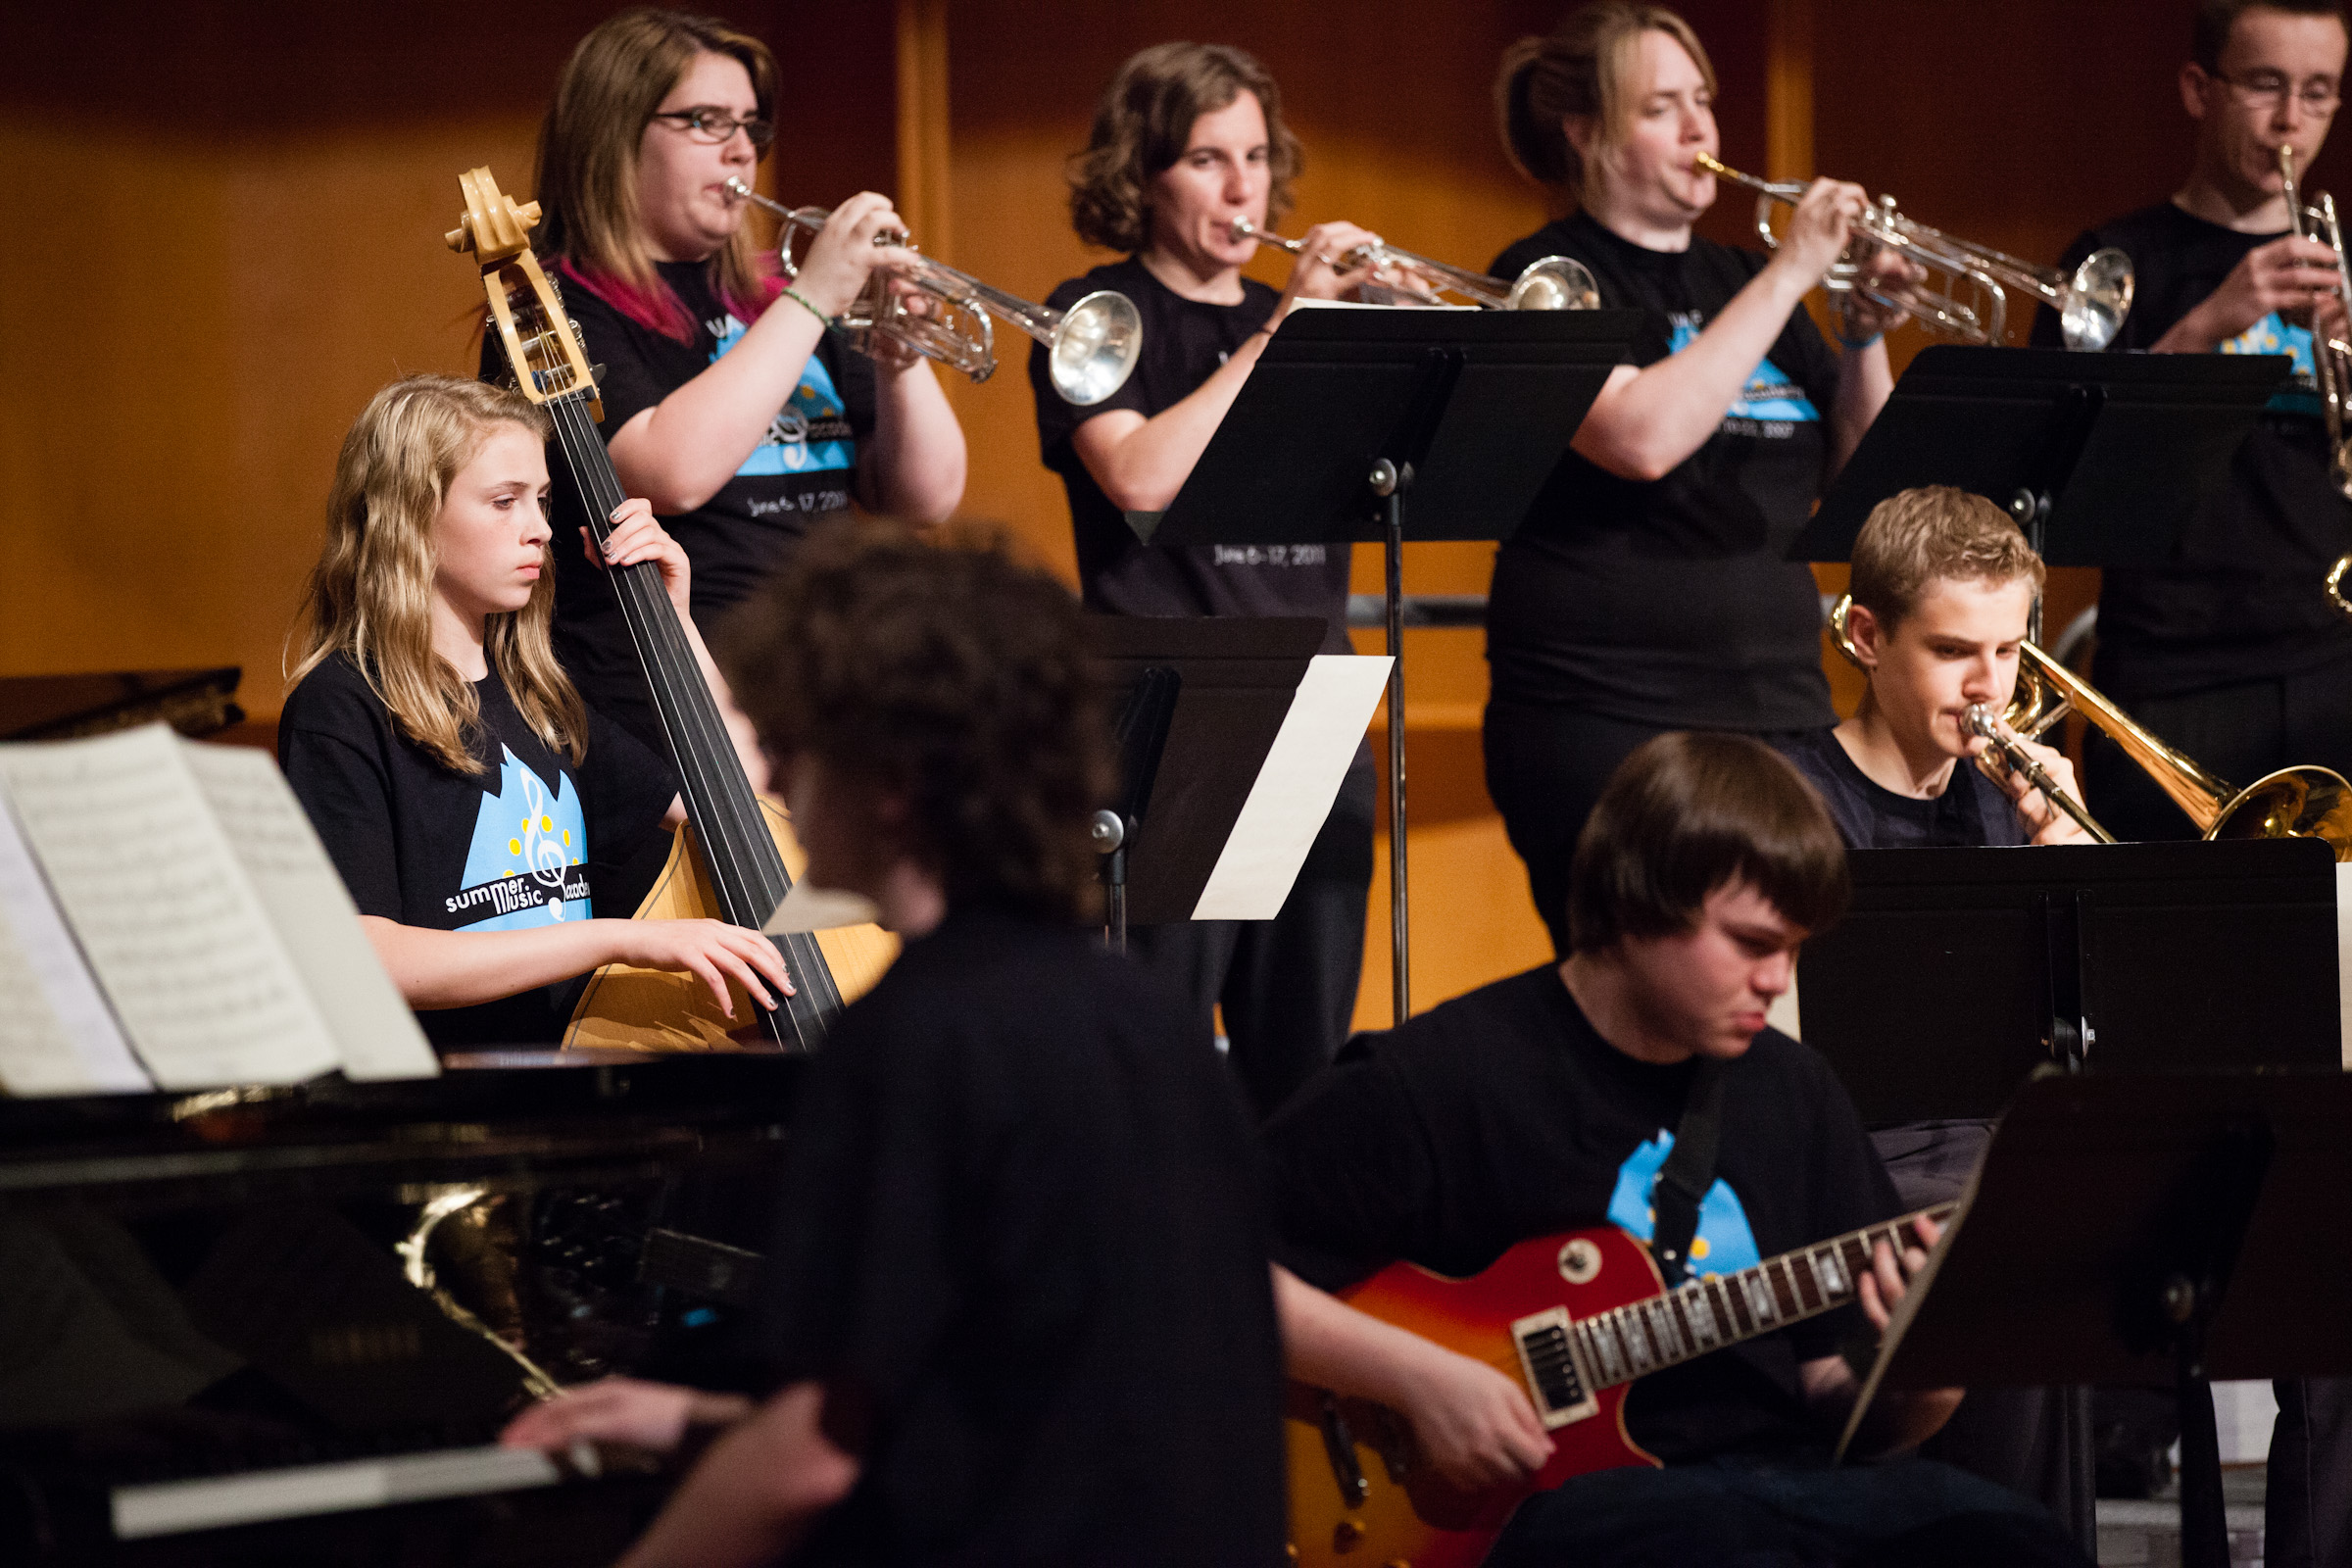 The UAF Summer Music Academy Jazz Band performs at the Davis Concert Hall, Friday, June 15, 2012. | UAF Photo by JR Ancheta